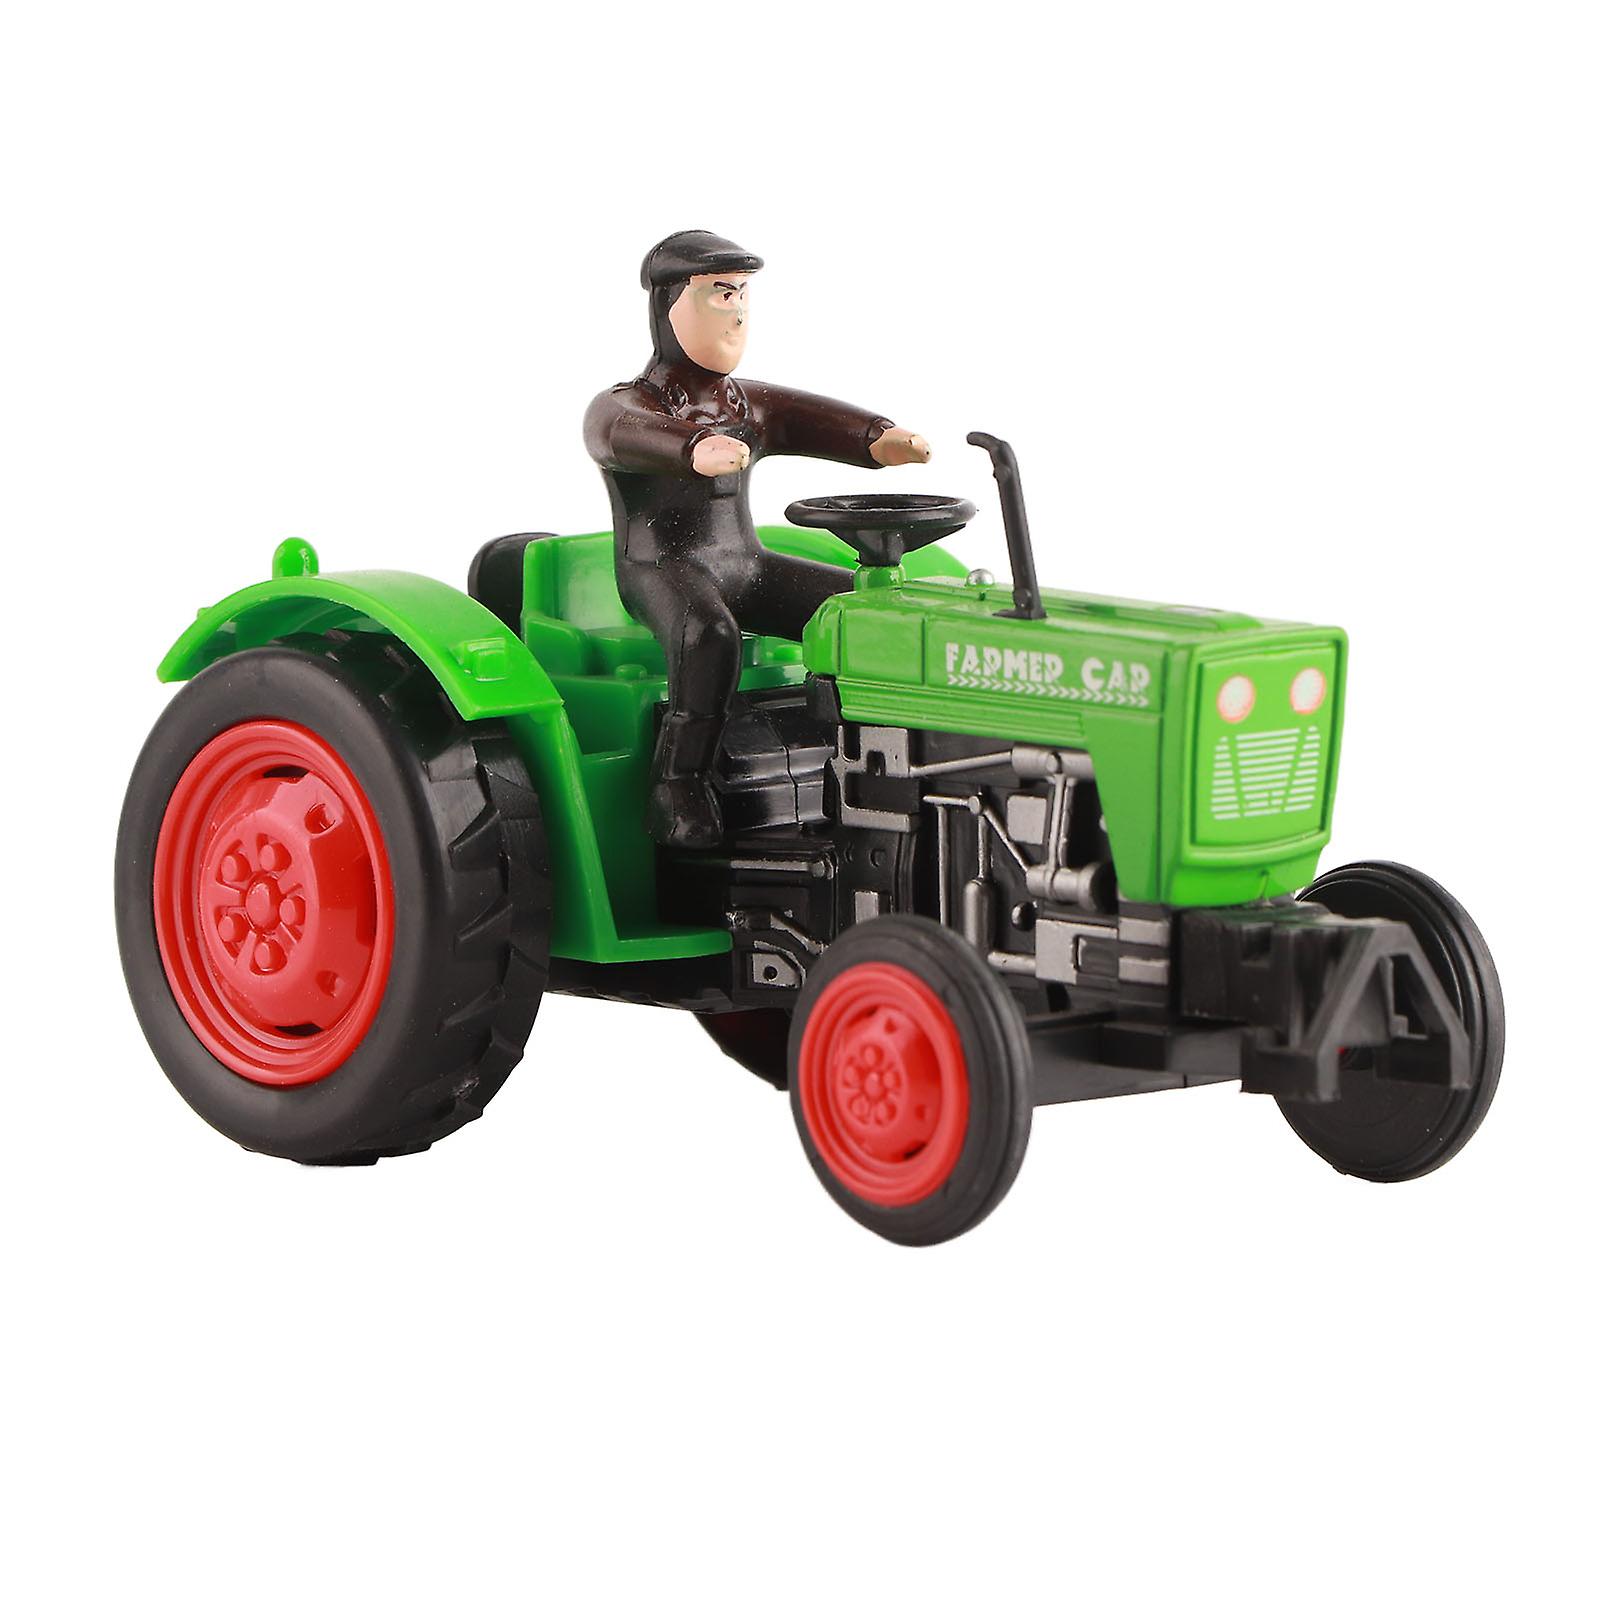 Simulation Tractor Vehiclekids Farm Tractor Toys  Model Sturdy Alloy Engineering Farmer Car Toy For Childrengreen